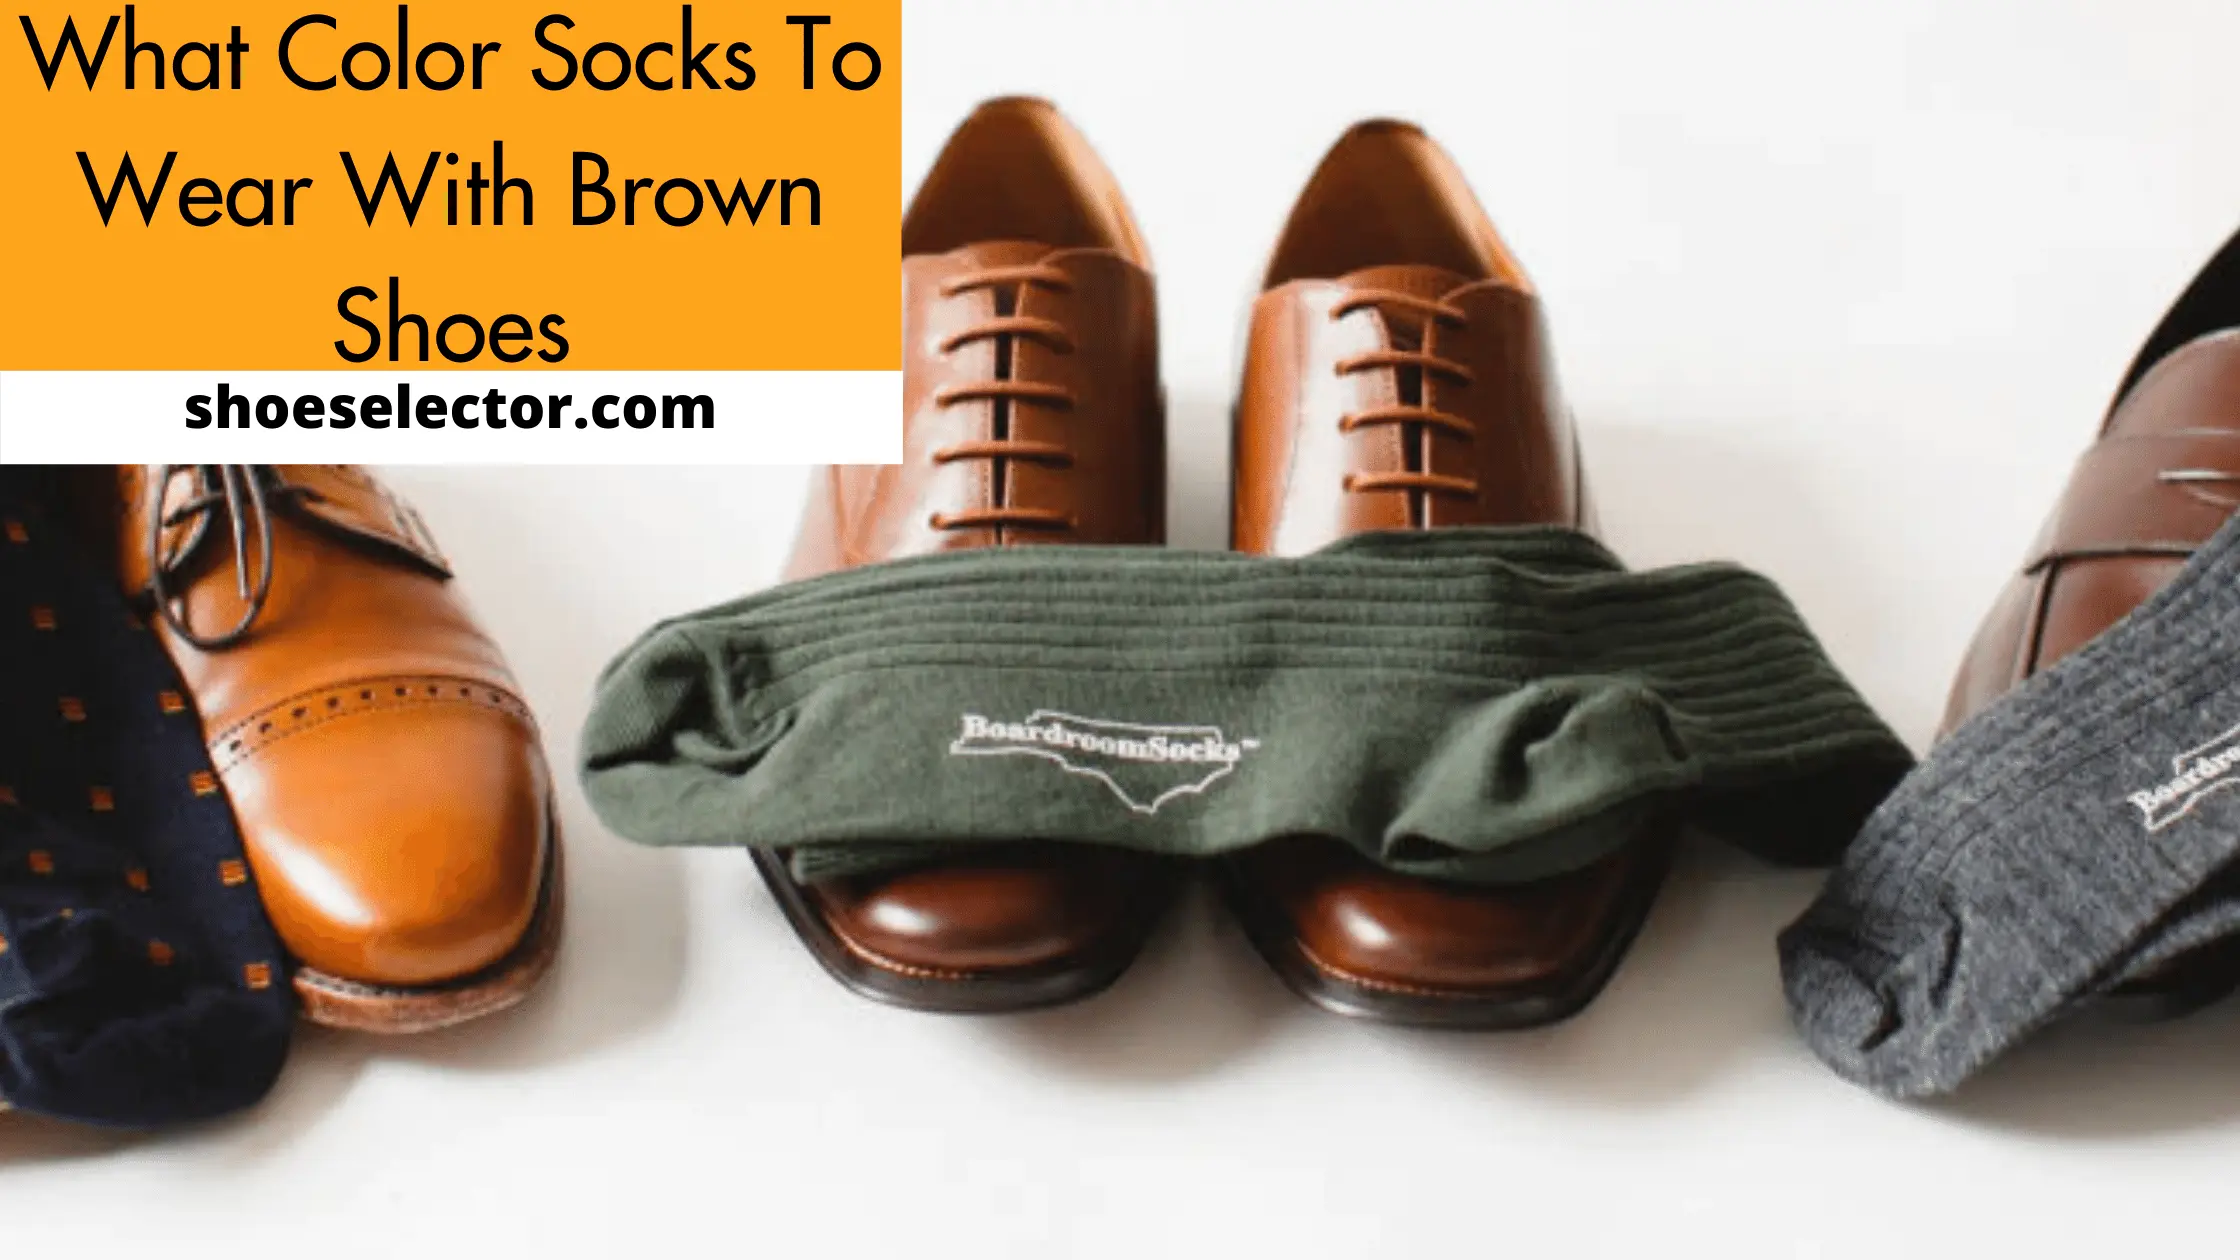 What Color Socks To Wear With Brown Shoes? Easy Gide